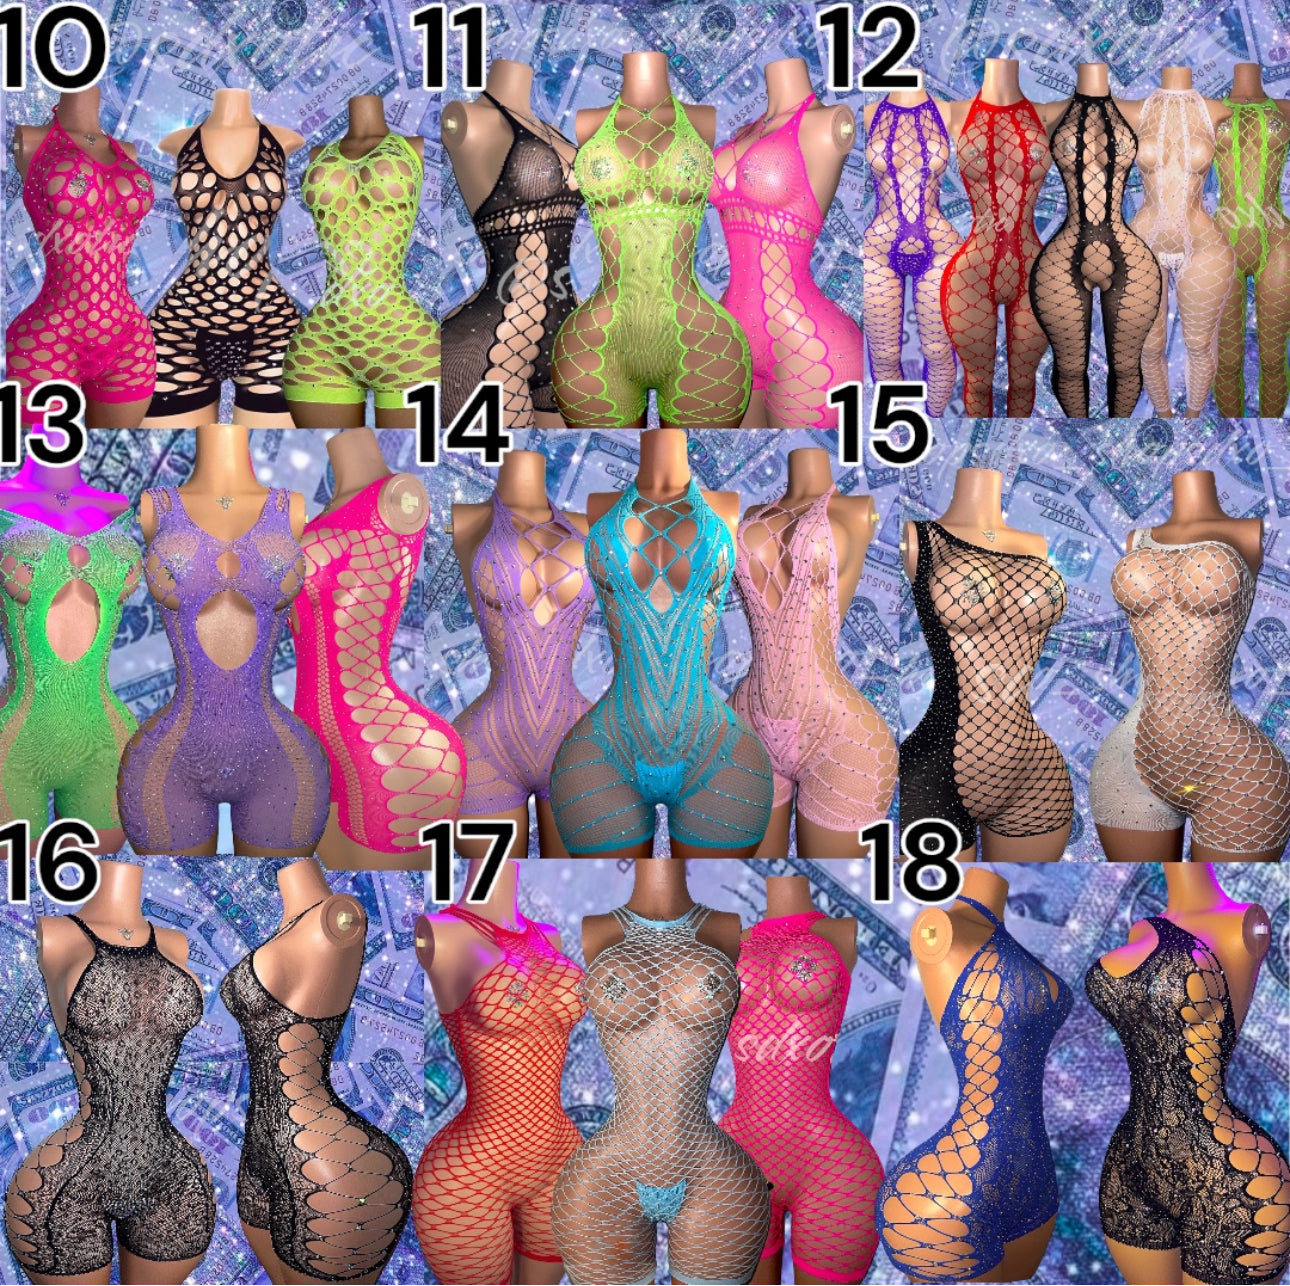 WHOLESALE FISHNETS 16-50 PIECES FITS XS-L (CHOSEN AUTOMATICALLY OR EMAIL TO CHOOSE)